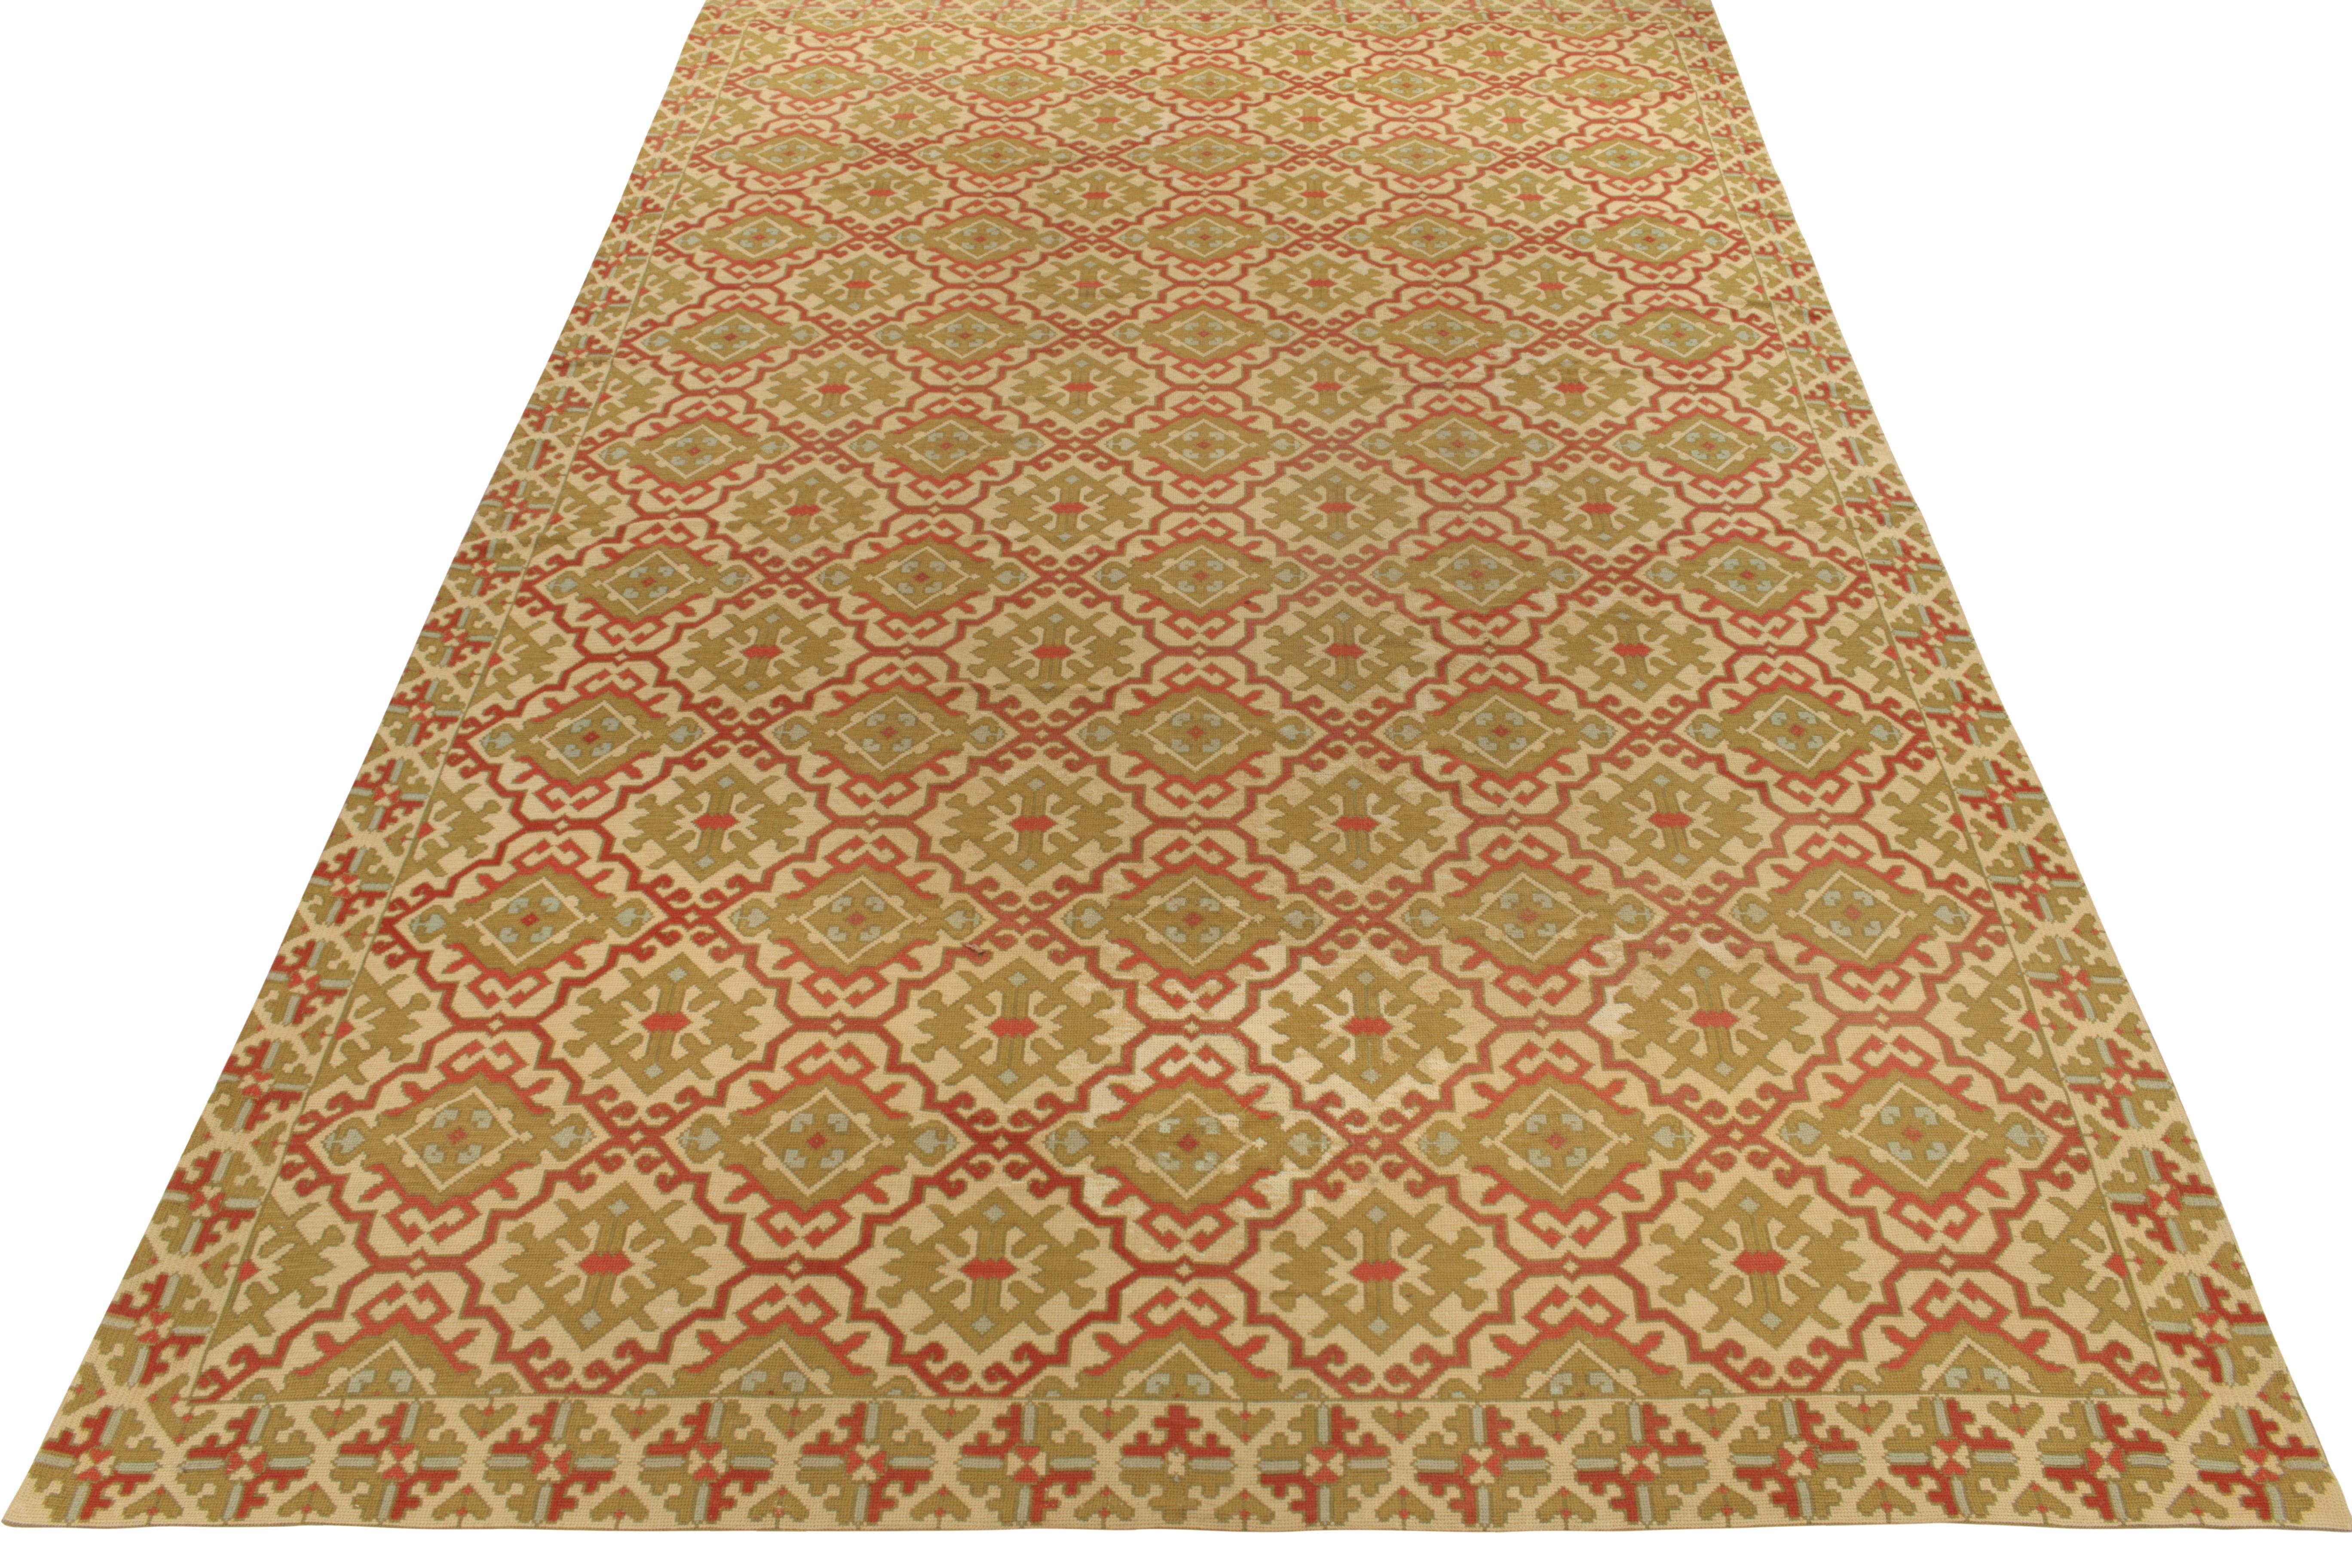 Originating from Spain circa 1950-1960, a vintage mid-century 10x16 needlepoint rug joining Rug & Kilim’s Antique & Vintage collection. Hand crafted in wool, the piece enjoys a meticulous geometric pattern in bright red, beige-brown and pastel green